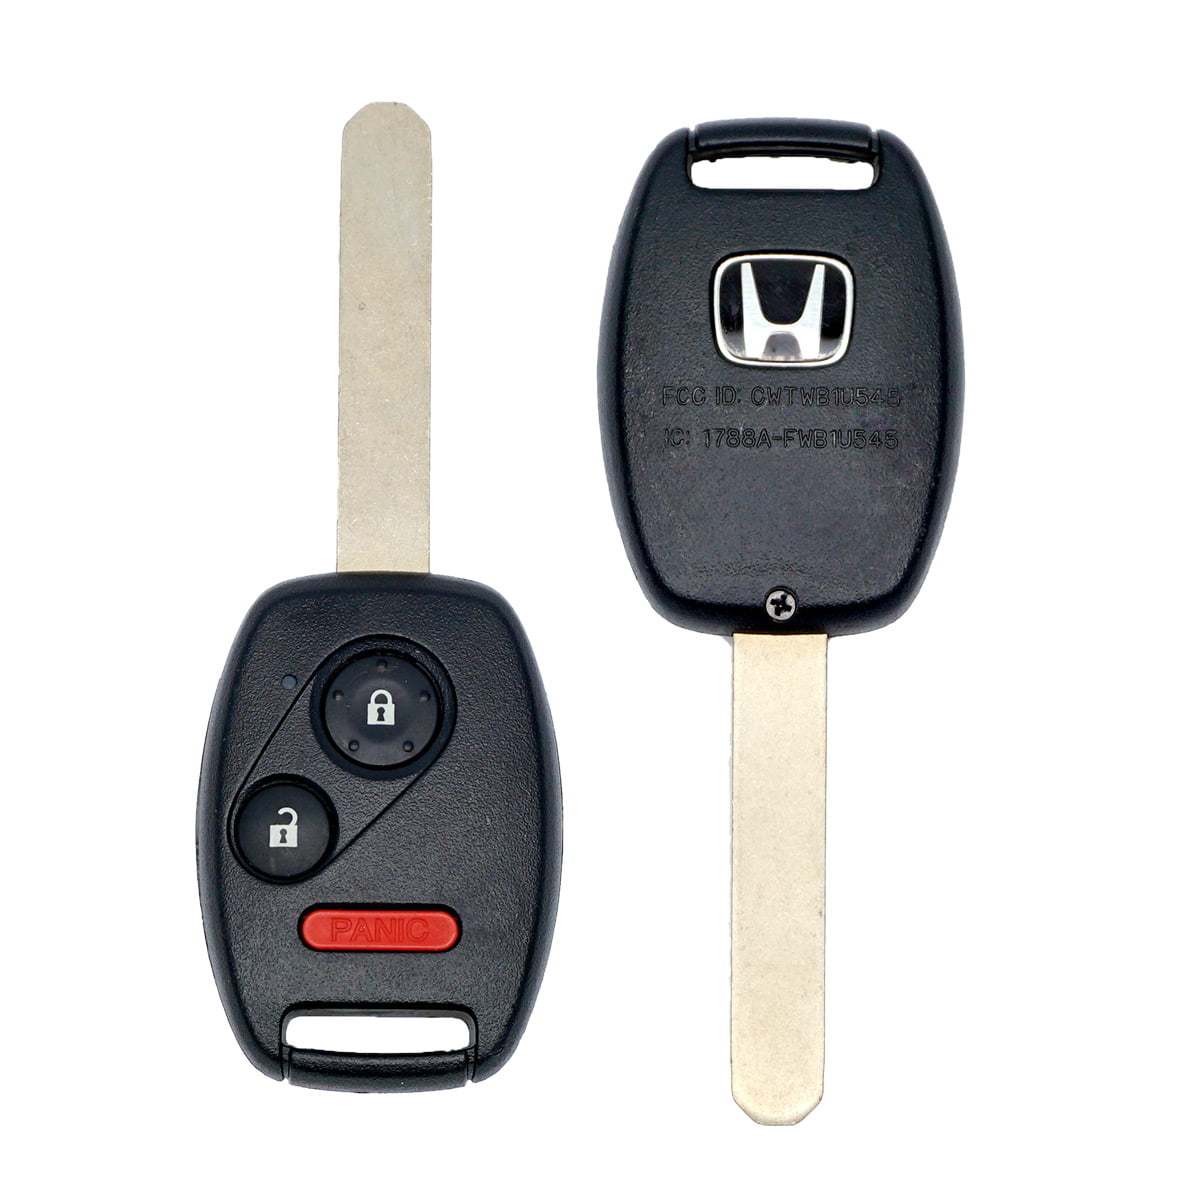 cciyu X 1 Flip Key Fob with Key Blade 3 buttons Replacement for 05 06 07 08 for H onda Pilot Series with FCC CWTWB1U545-2 